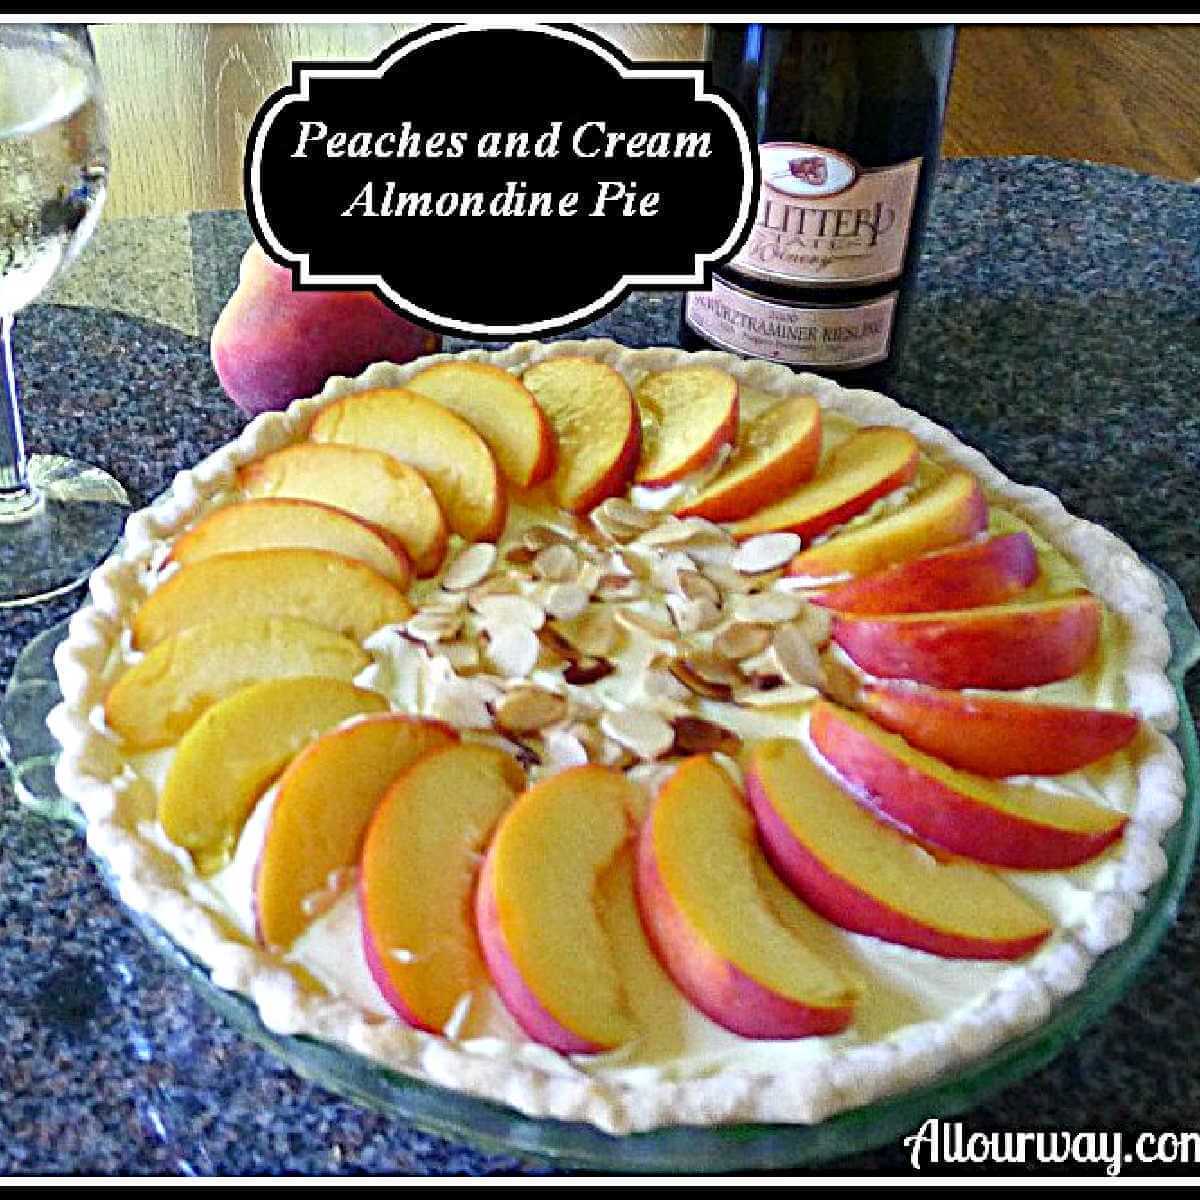 Peaches and Cream Pie with sliced peaches and shaved almonds on top.